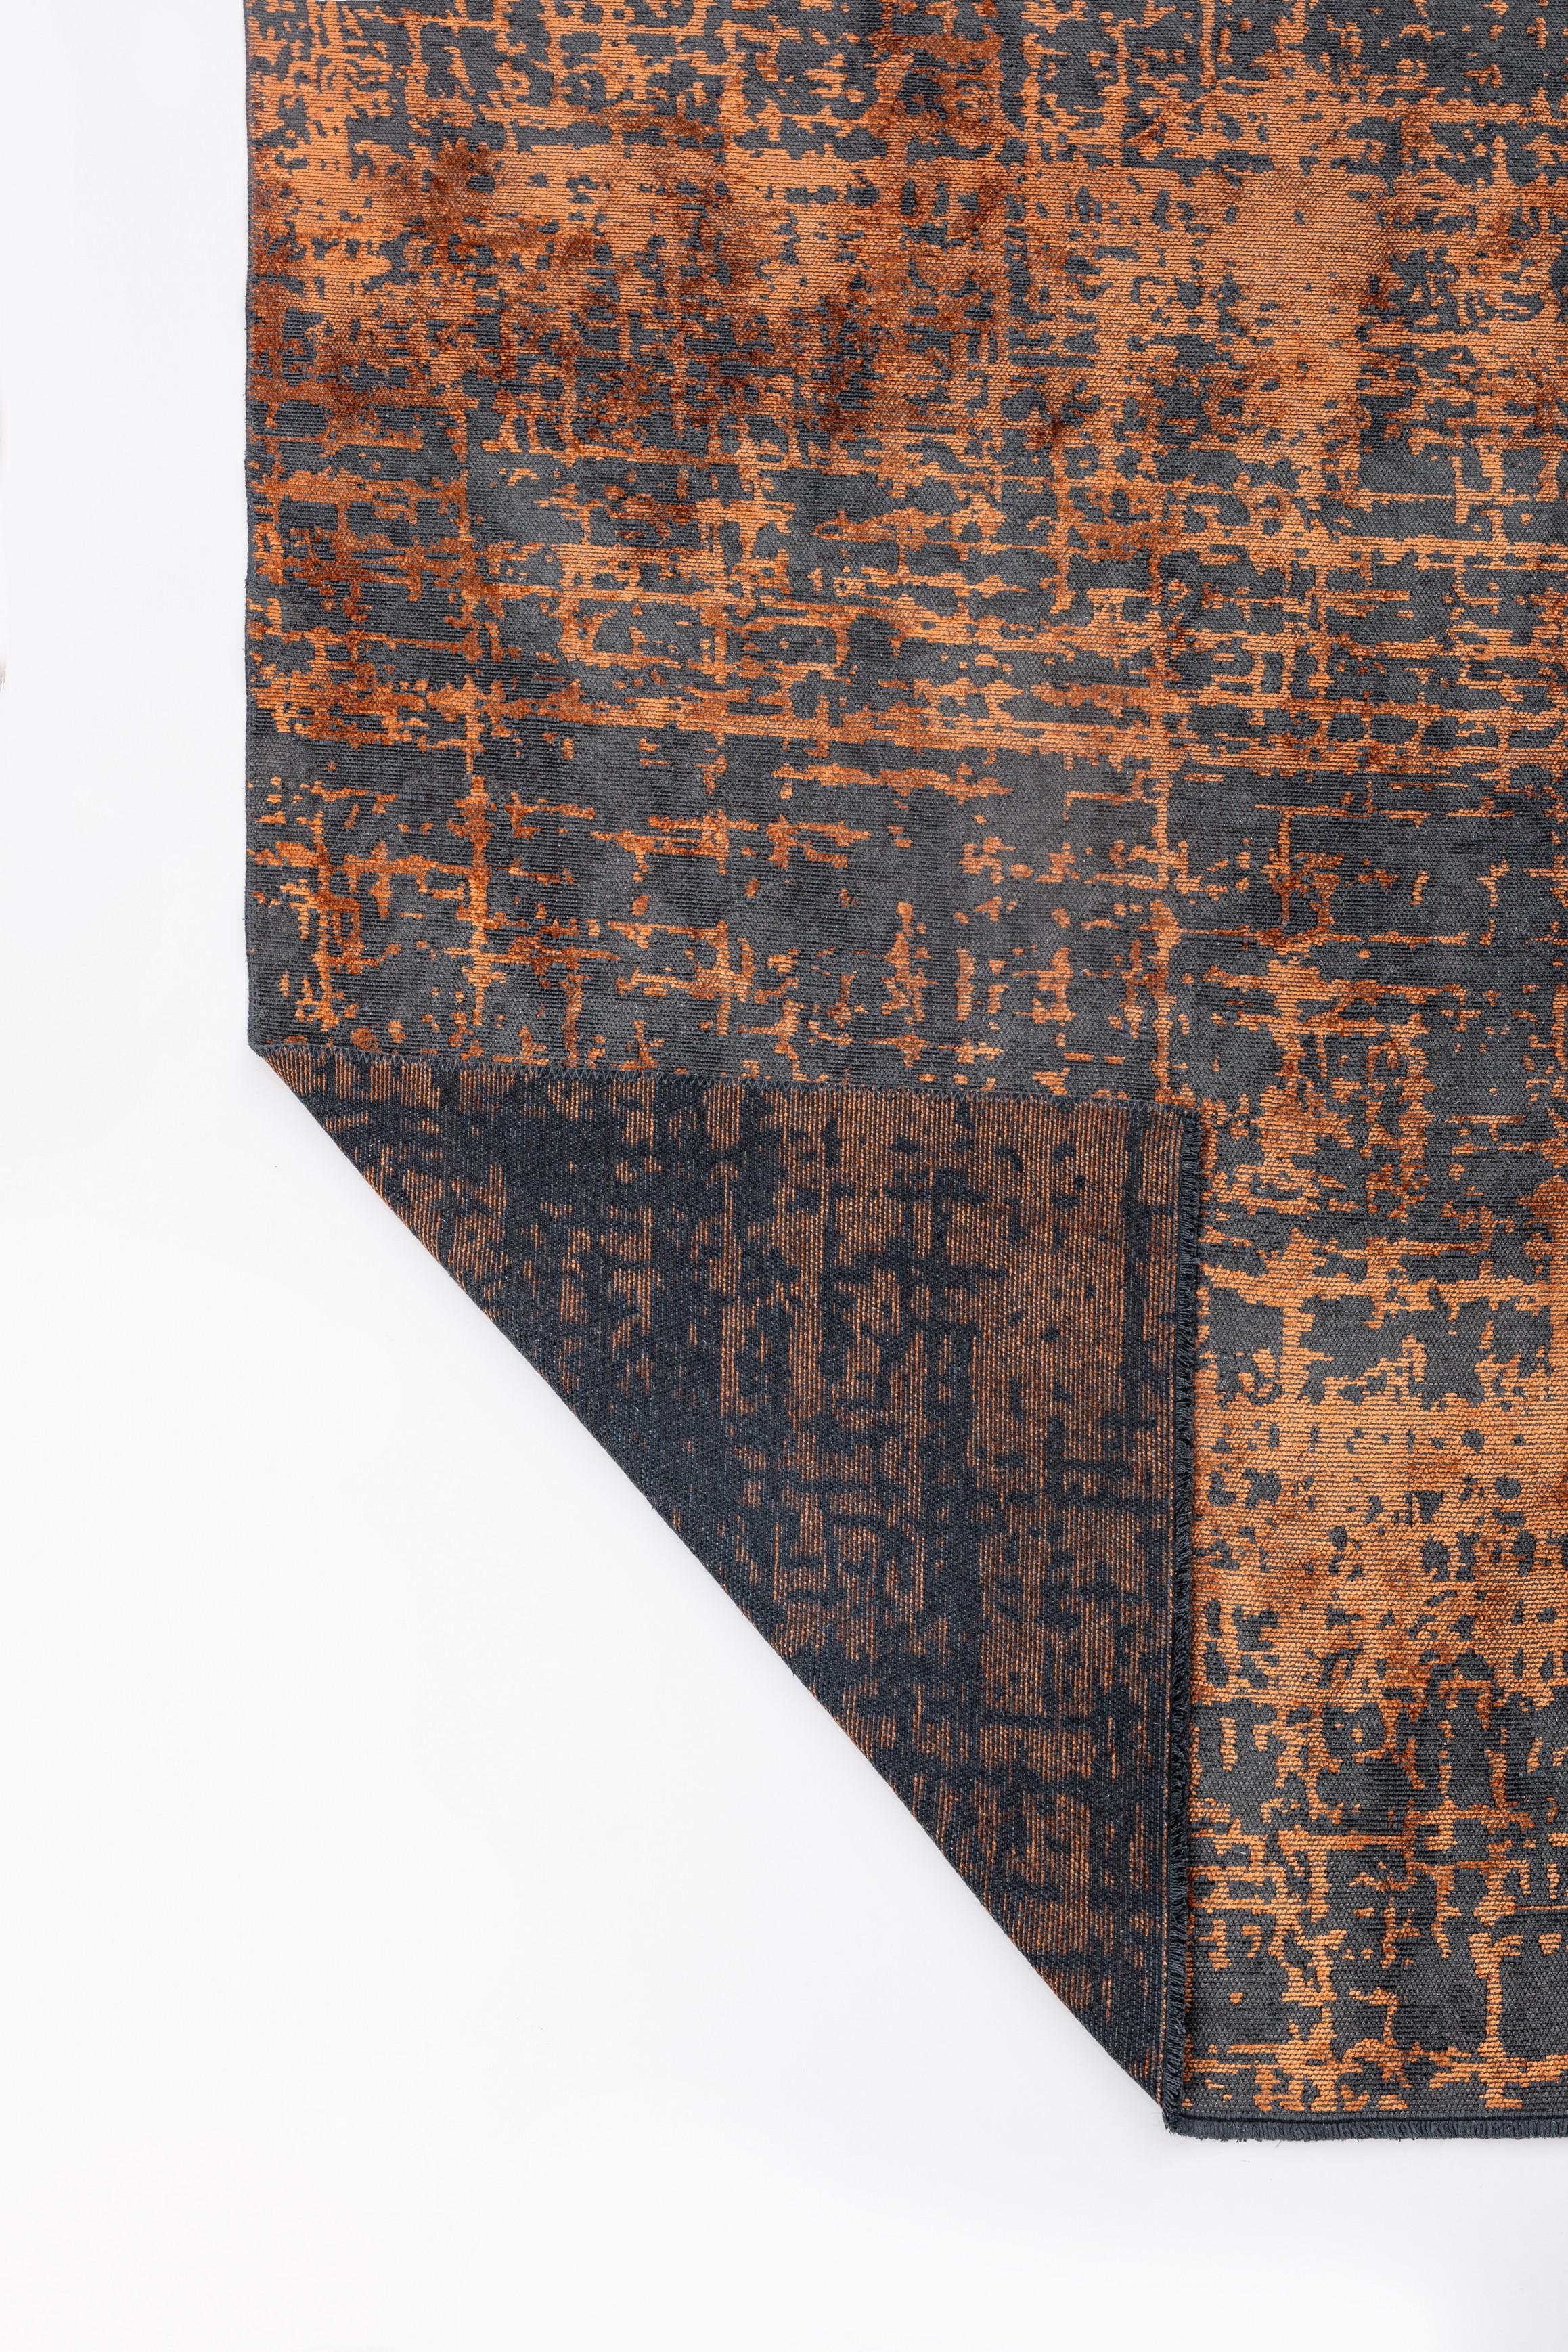 For Sale:  (Orange) Modern Abstract Luxury Hand-Finished Area Rug 3